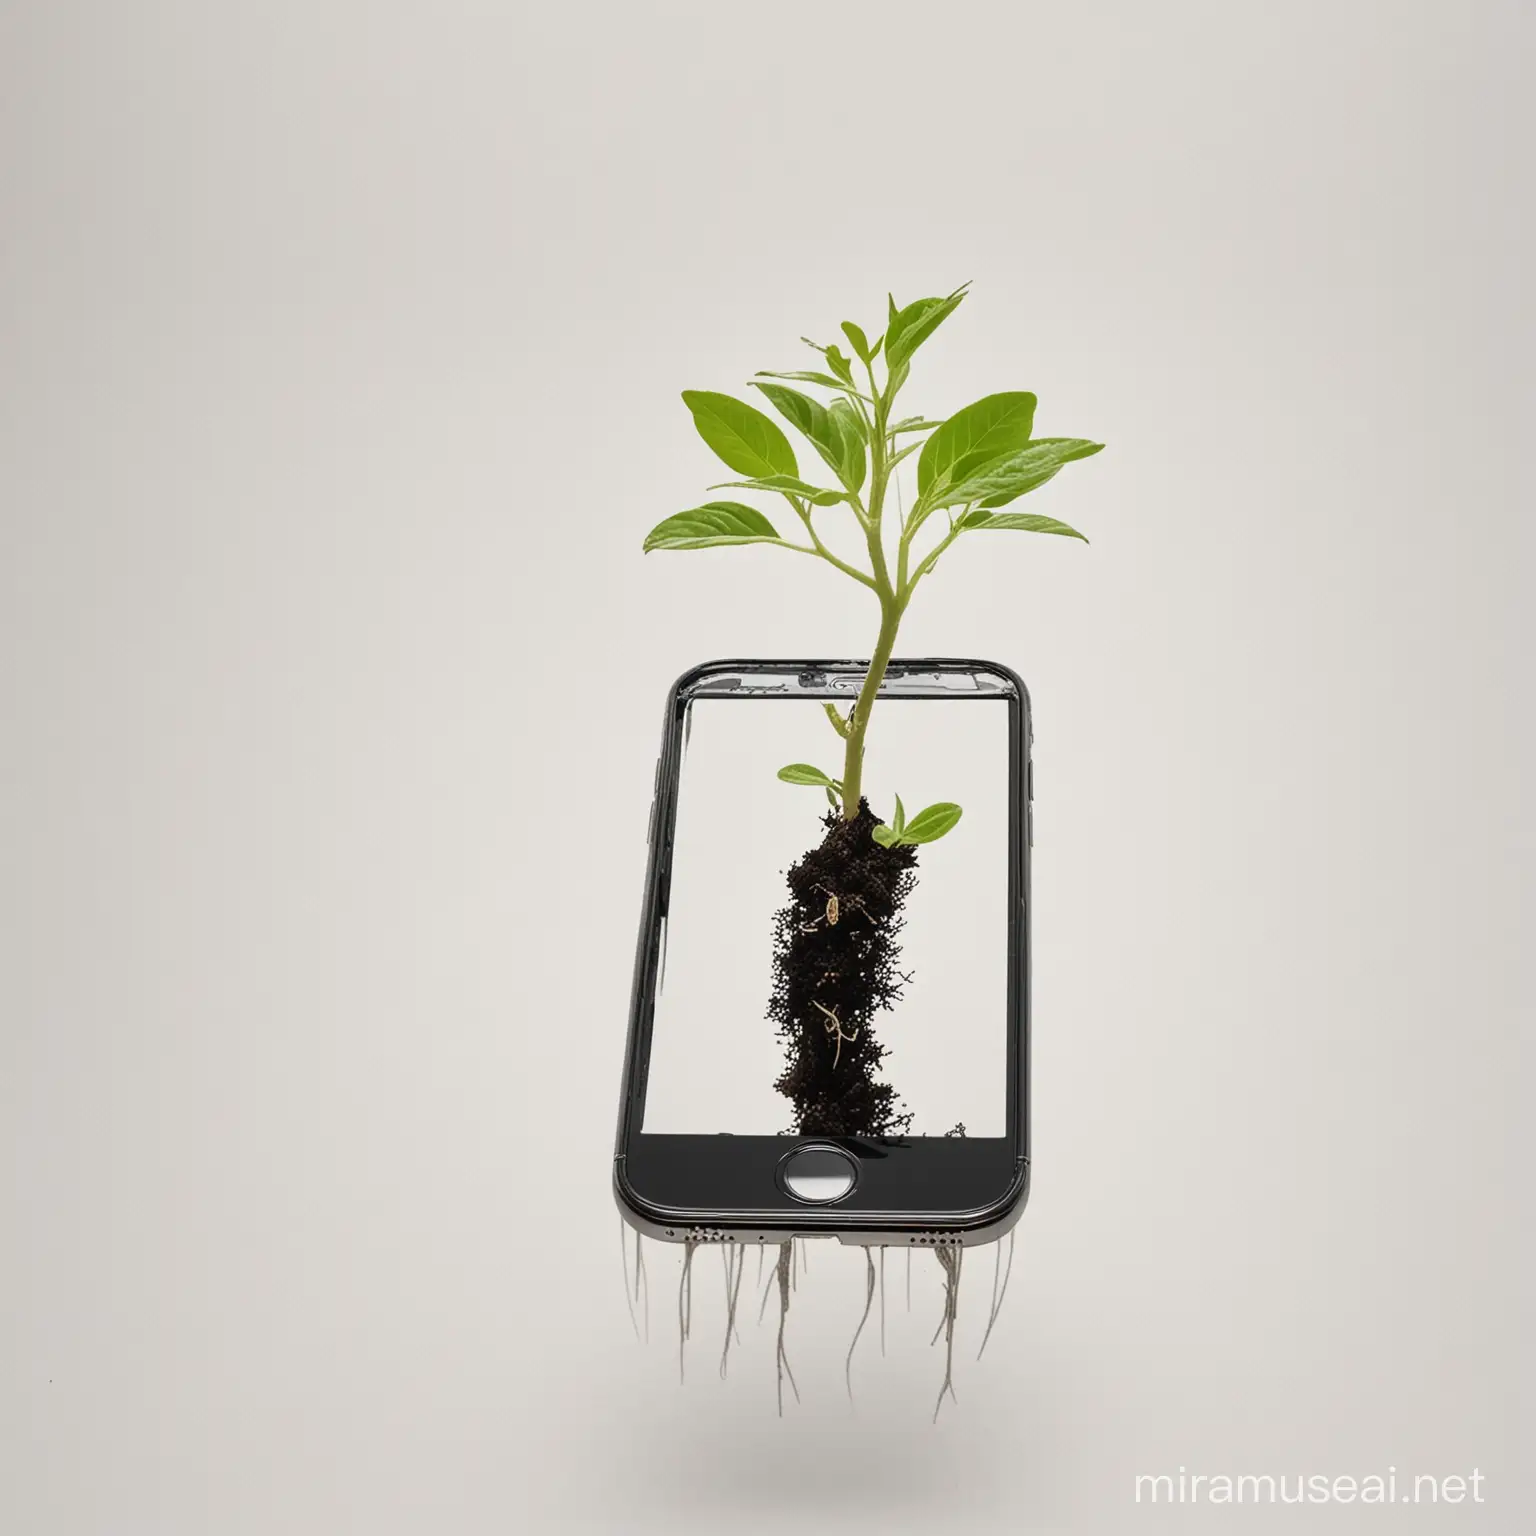 iPhone Transformed Plant Growth Emerging from Smartphone